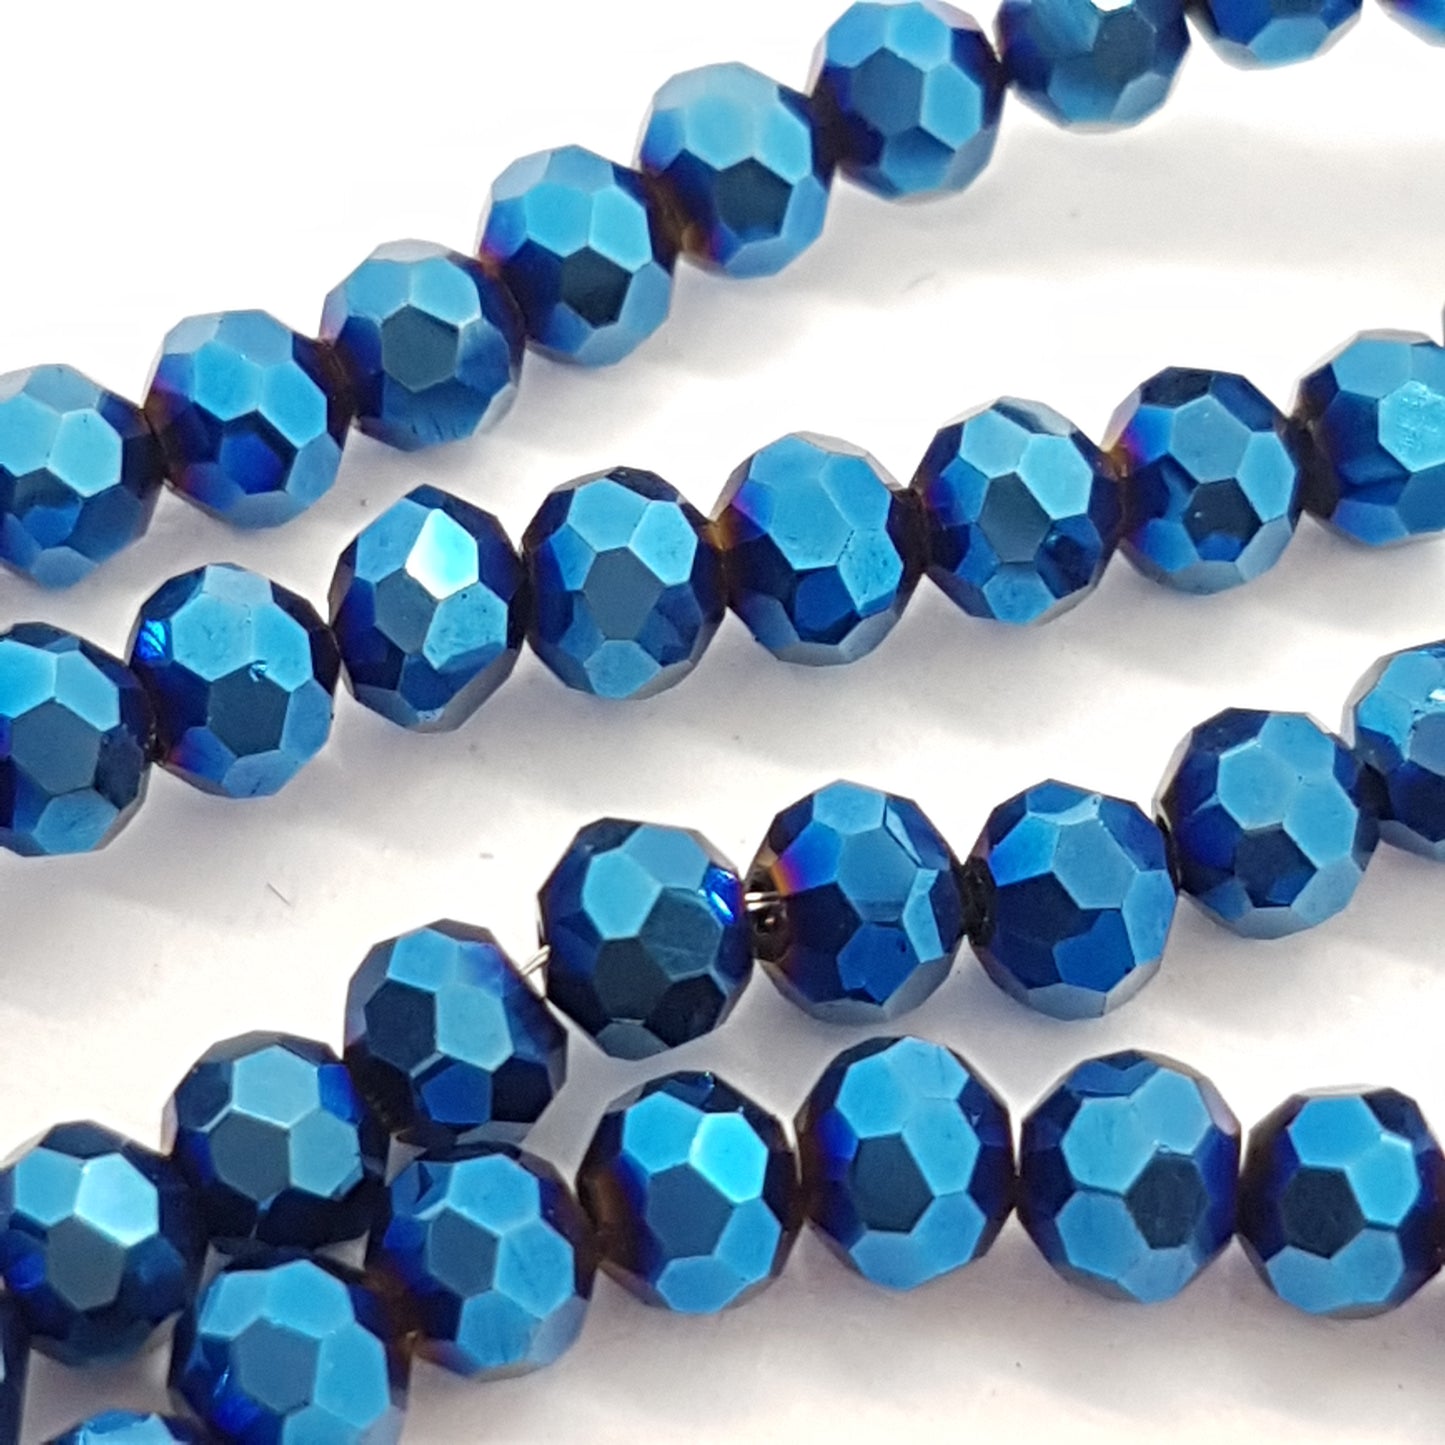 Metallic Blue Faceted Crystal Glass Beads